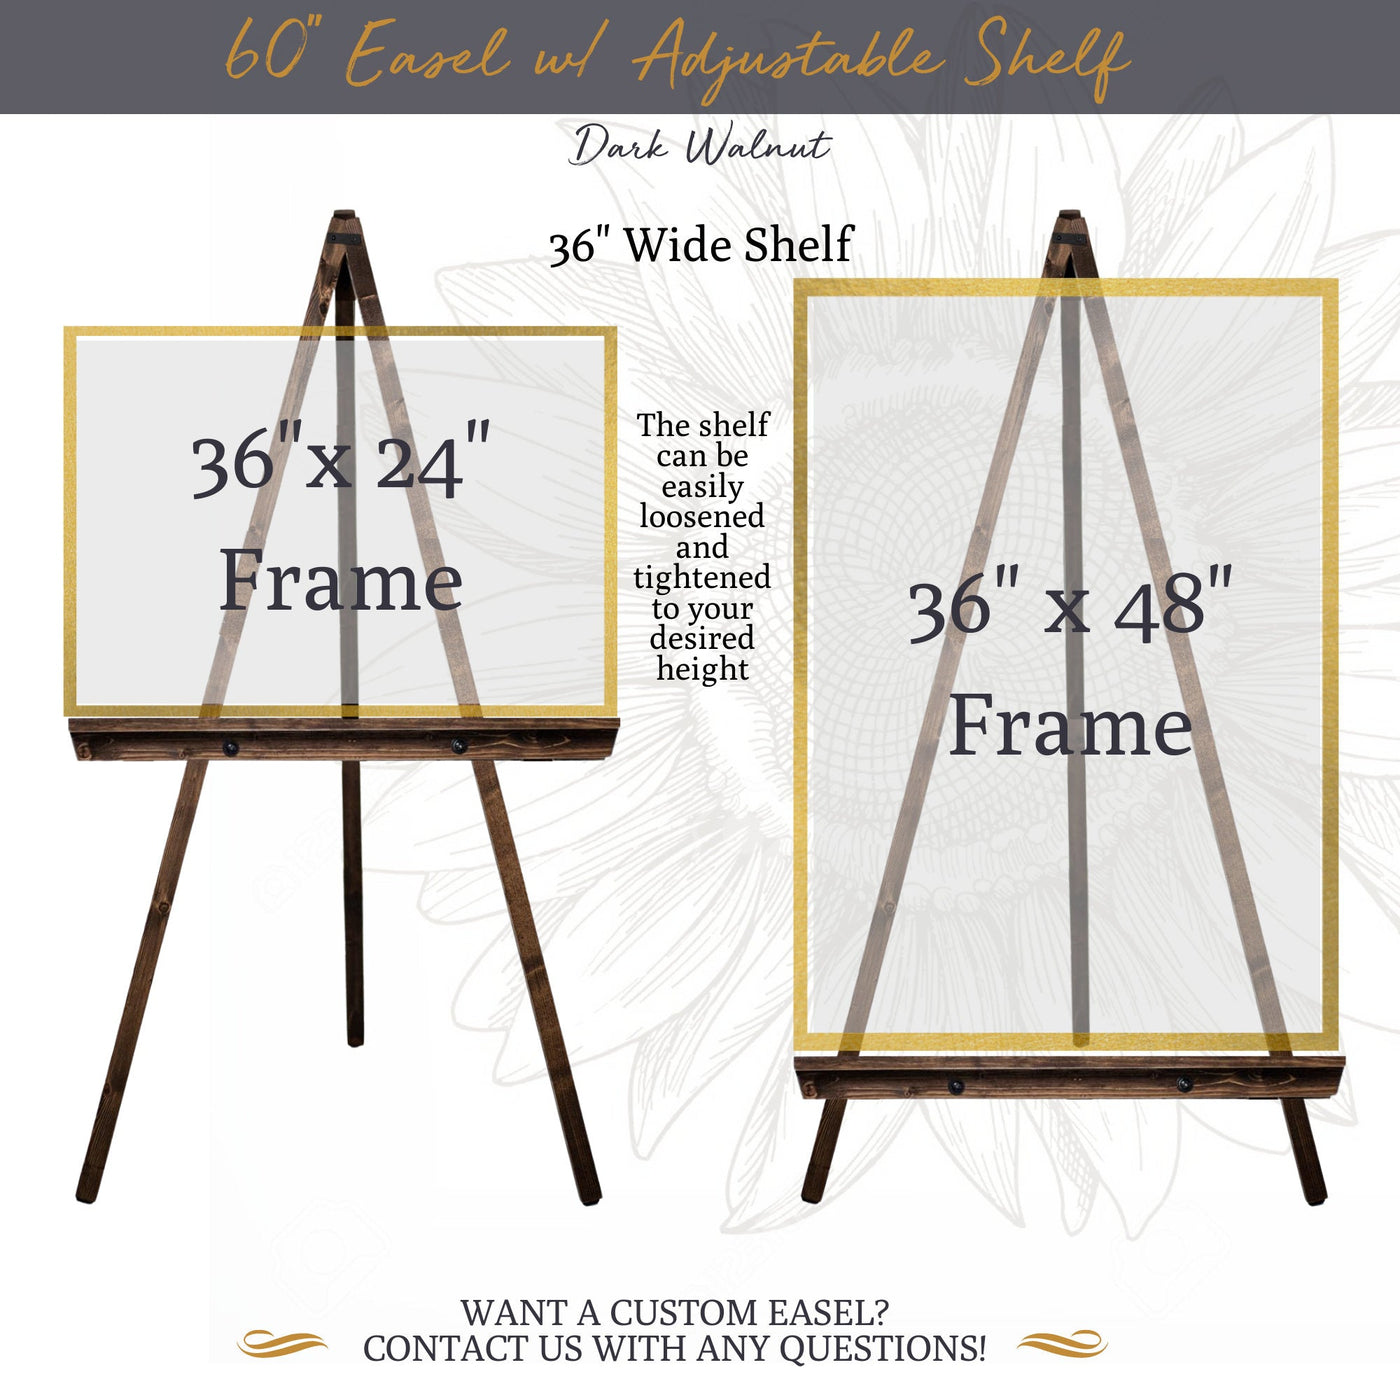 Easel Stand for Wedding Sign > Stainable Wooden Floor Easel